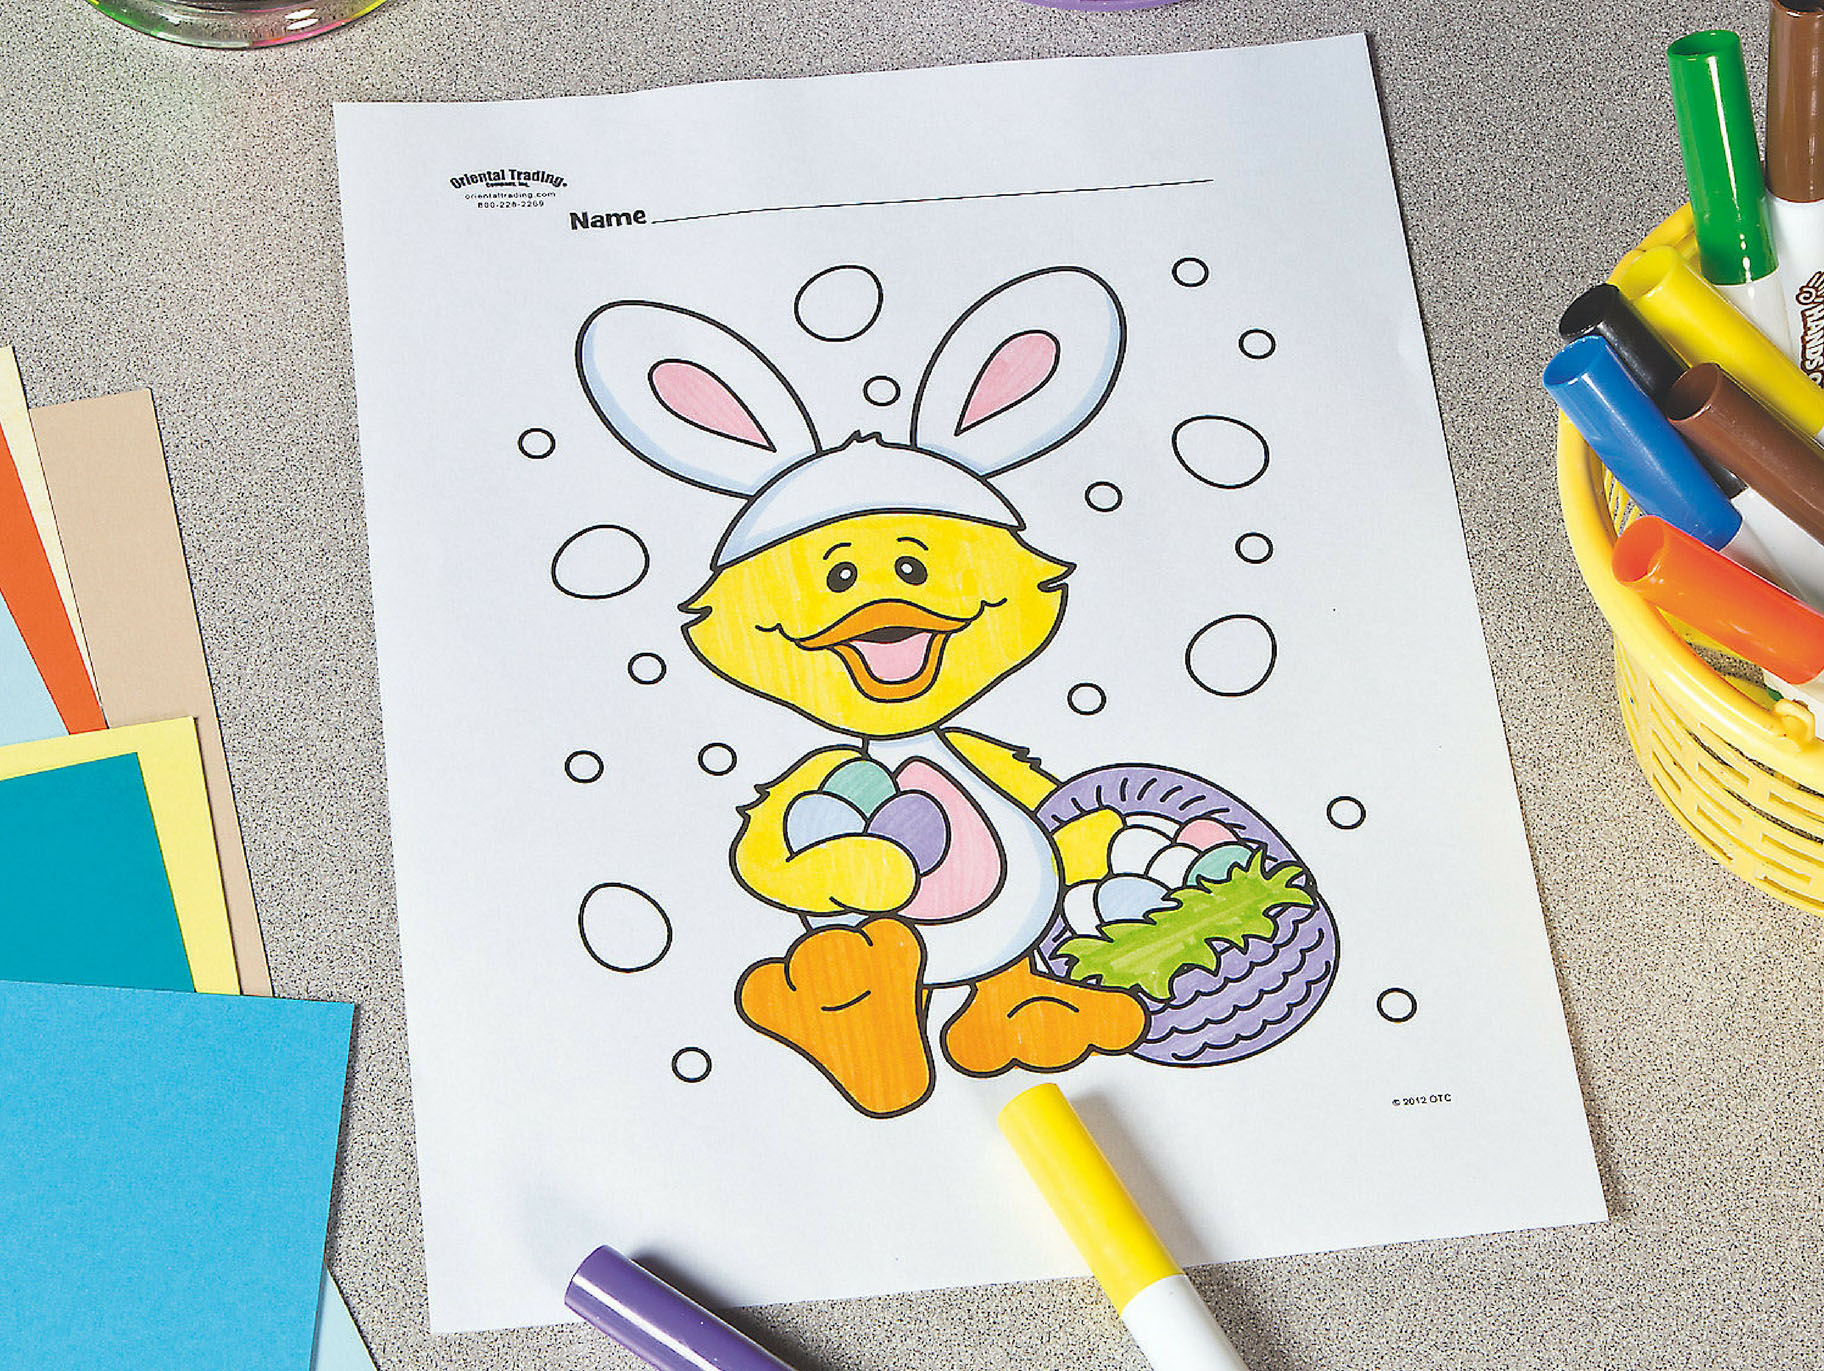 Paper Duck Coloring Pages - Free & Printable!